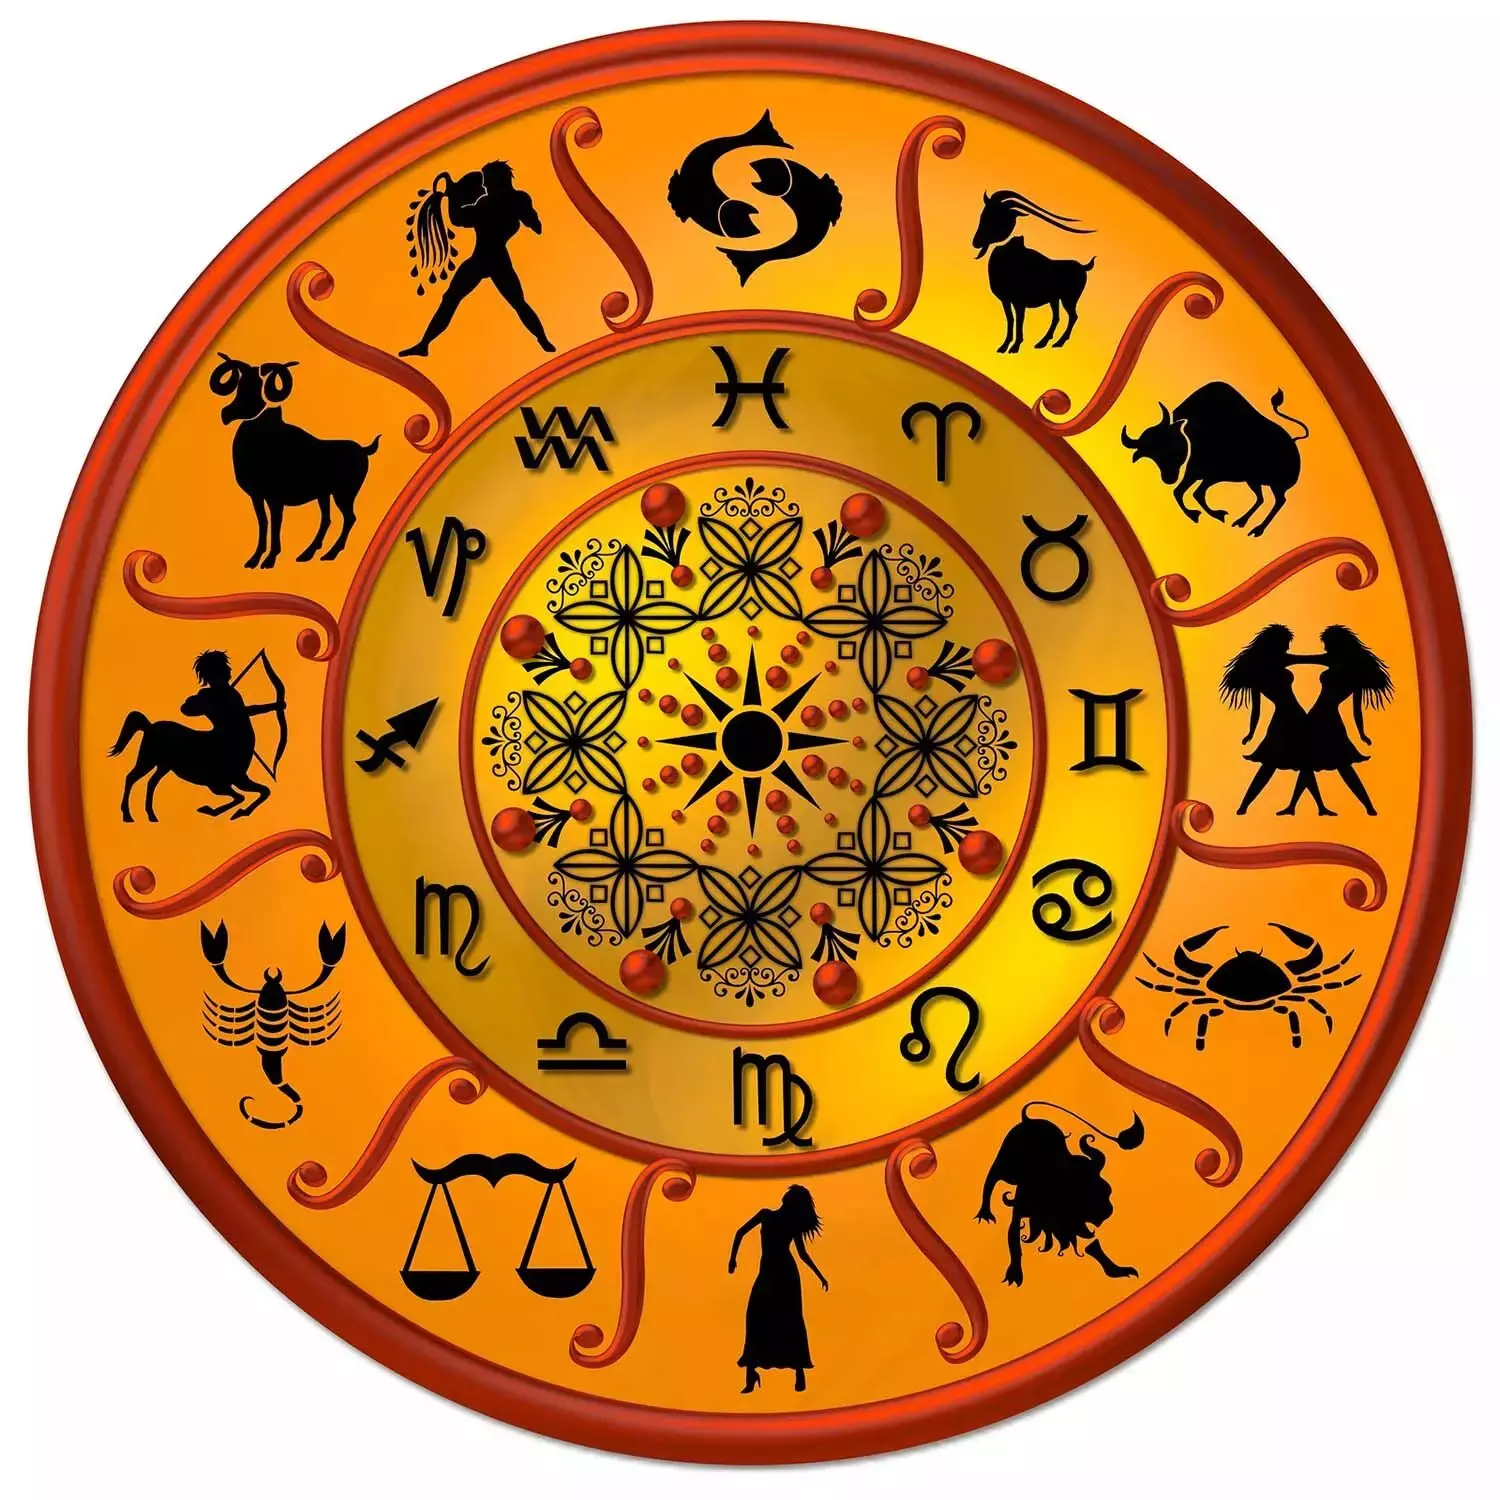 27 August  – Know your todays horoscope